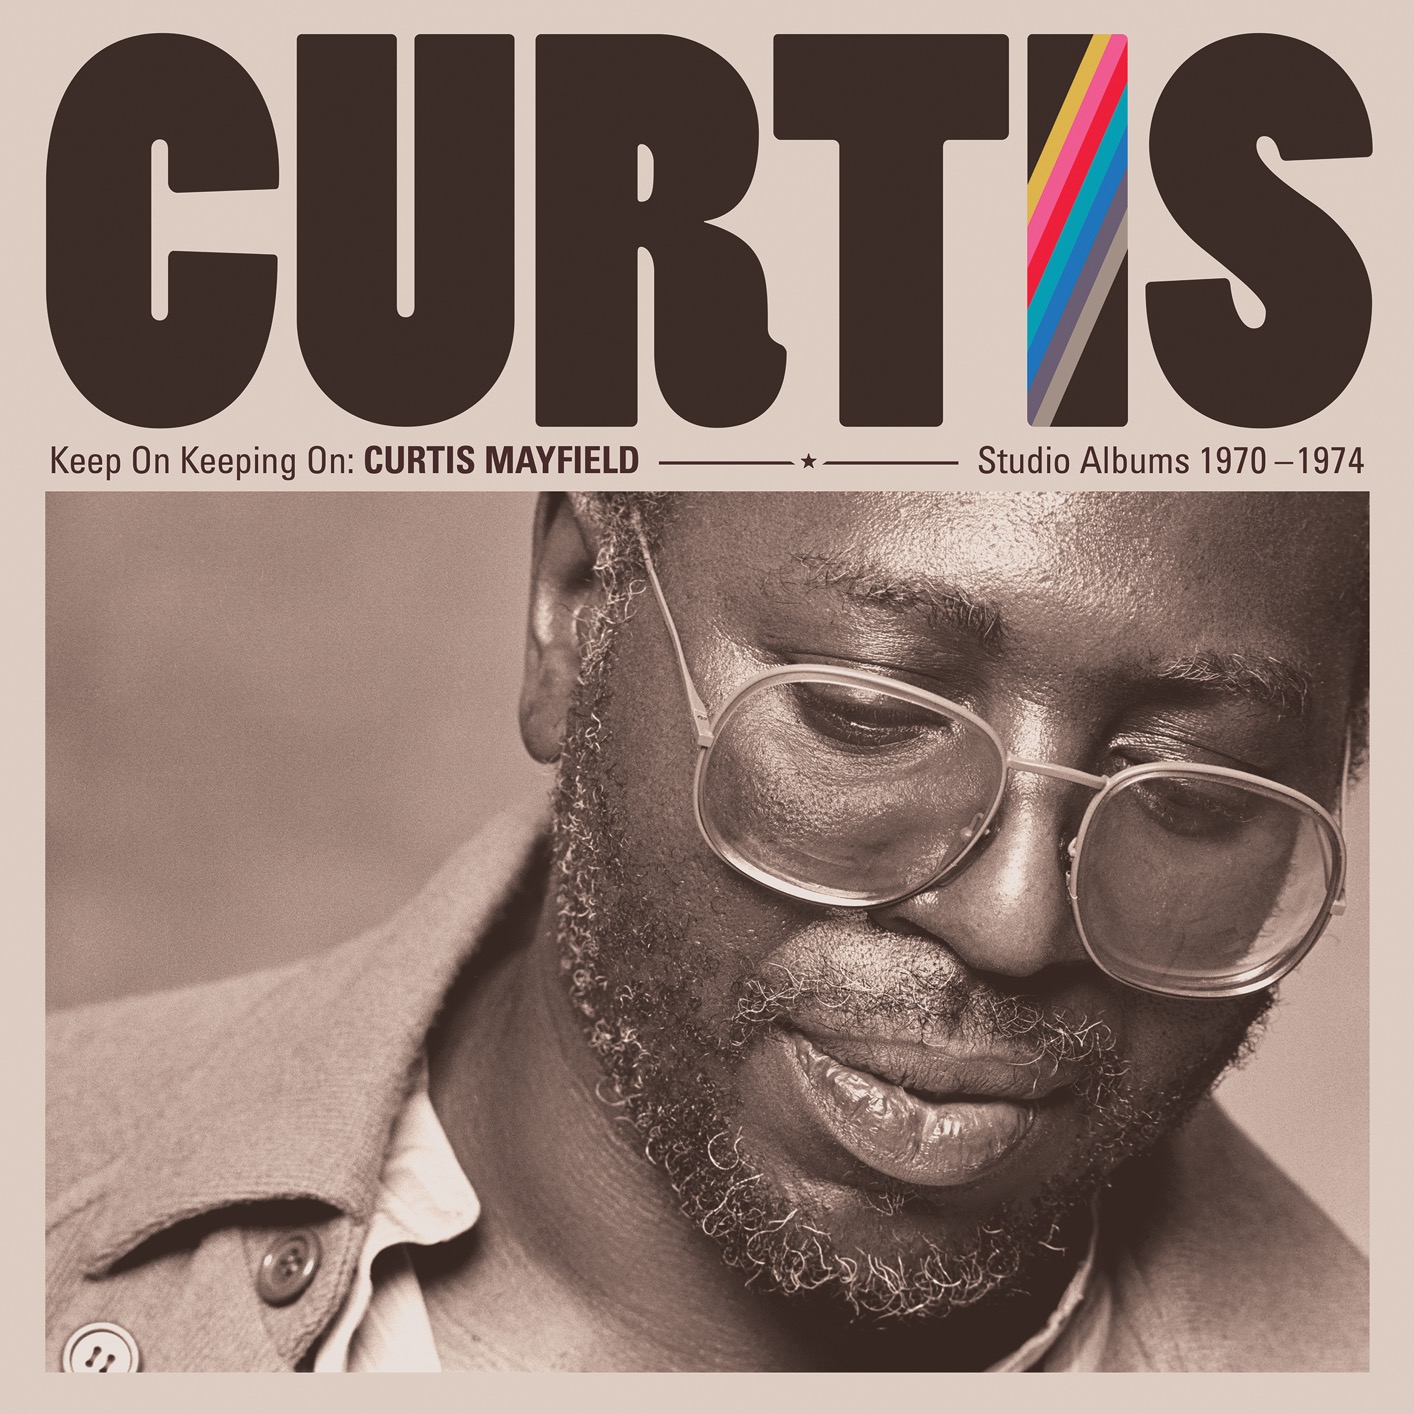 Curtis Mayfield - Keep On Keeping On: Curtis Mayfield Studio Albums 1970-1974 (Remastered) (2019) [FLAC 24bit/96kHz]